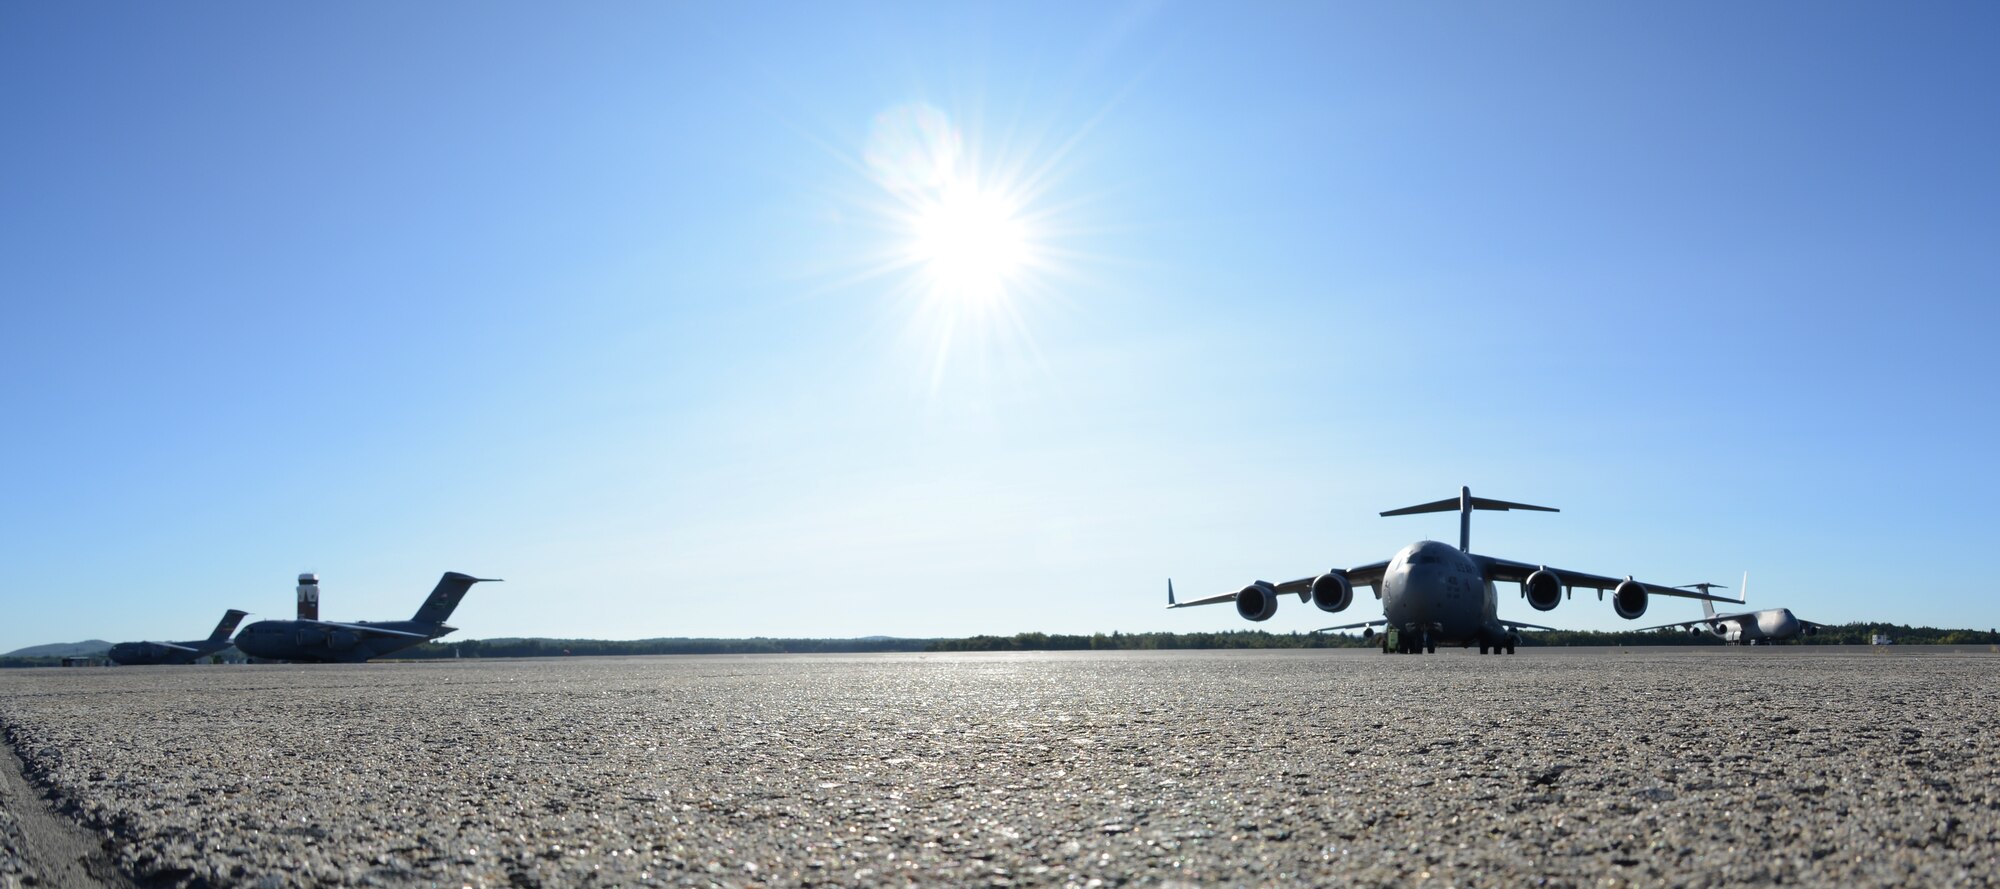 Three C-17 Globemaster IIIs sit on the flightline September 9, 2017, at Westover Air Reserve Base, Mass.  These three C-17s from Joint Base McGuire-Dix-Lakehurst, New Jersey, Joint Base Lewis-McChord, Washington and March ARB, California, are to be loaded with Federal Emergency Management Agency supplies by Westover ARB Reserve Citizen Airmen to assist those impacted by Hurricane Irma. (U.S. Air Force photo by Airman Hanna N. Smith)